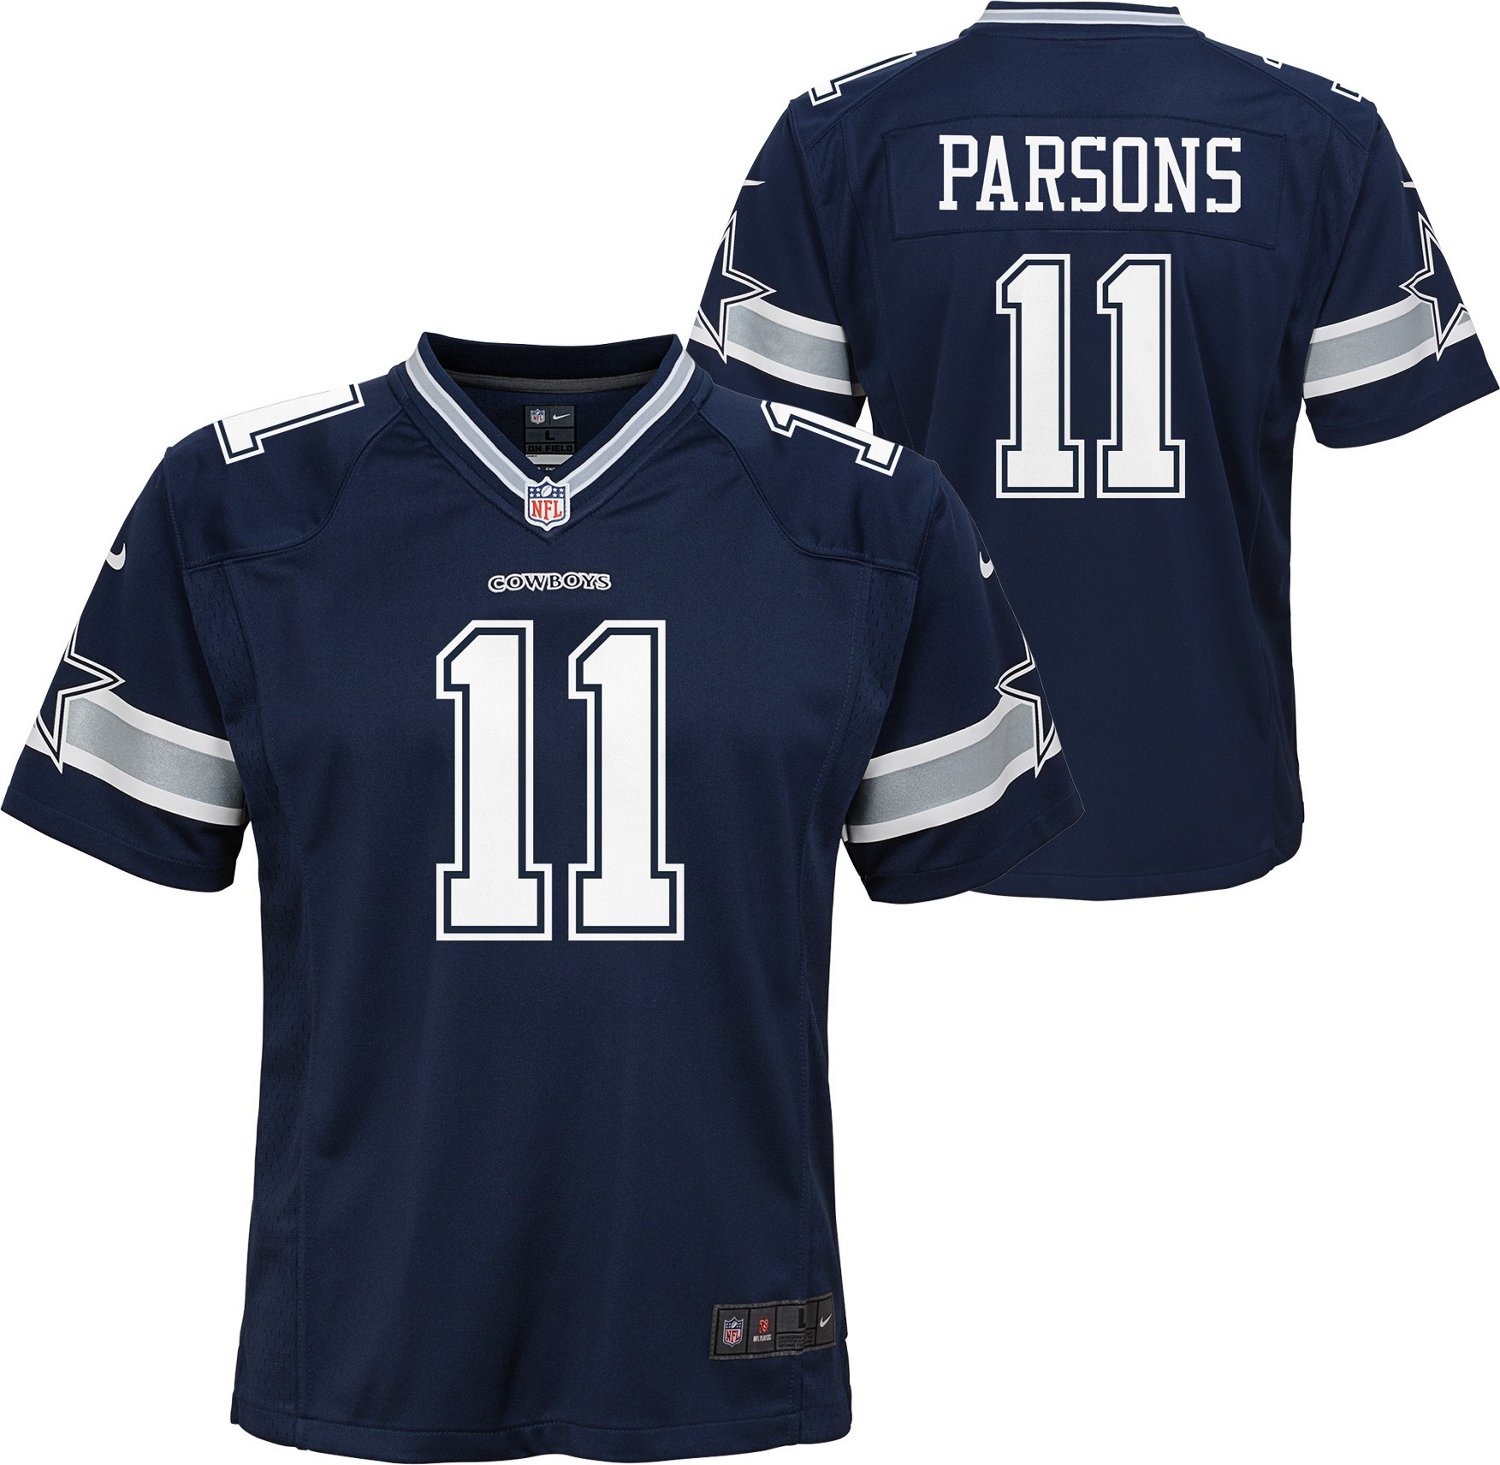 parsons 11 jersey